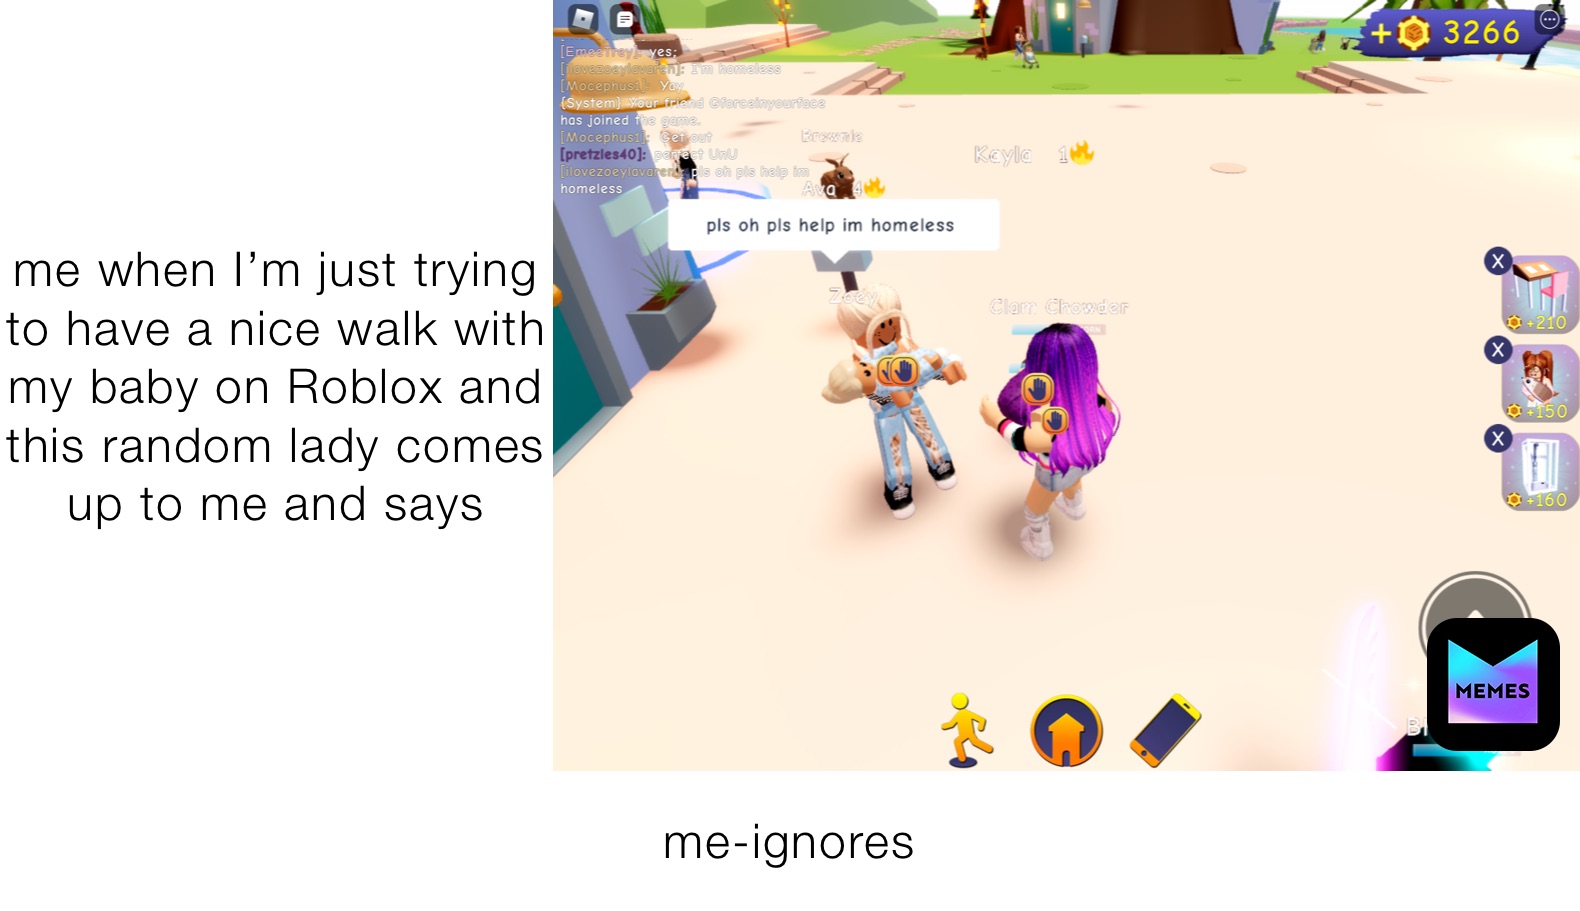 me when I’m just trying to have a nice walk with my baby on Roblox and this random lady comes up to me and says me-ignores 